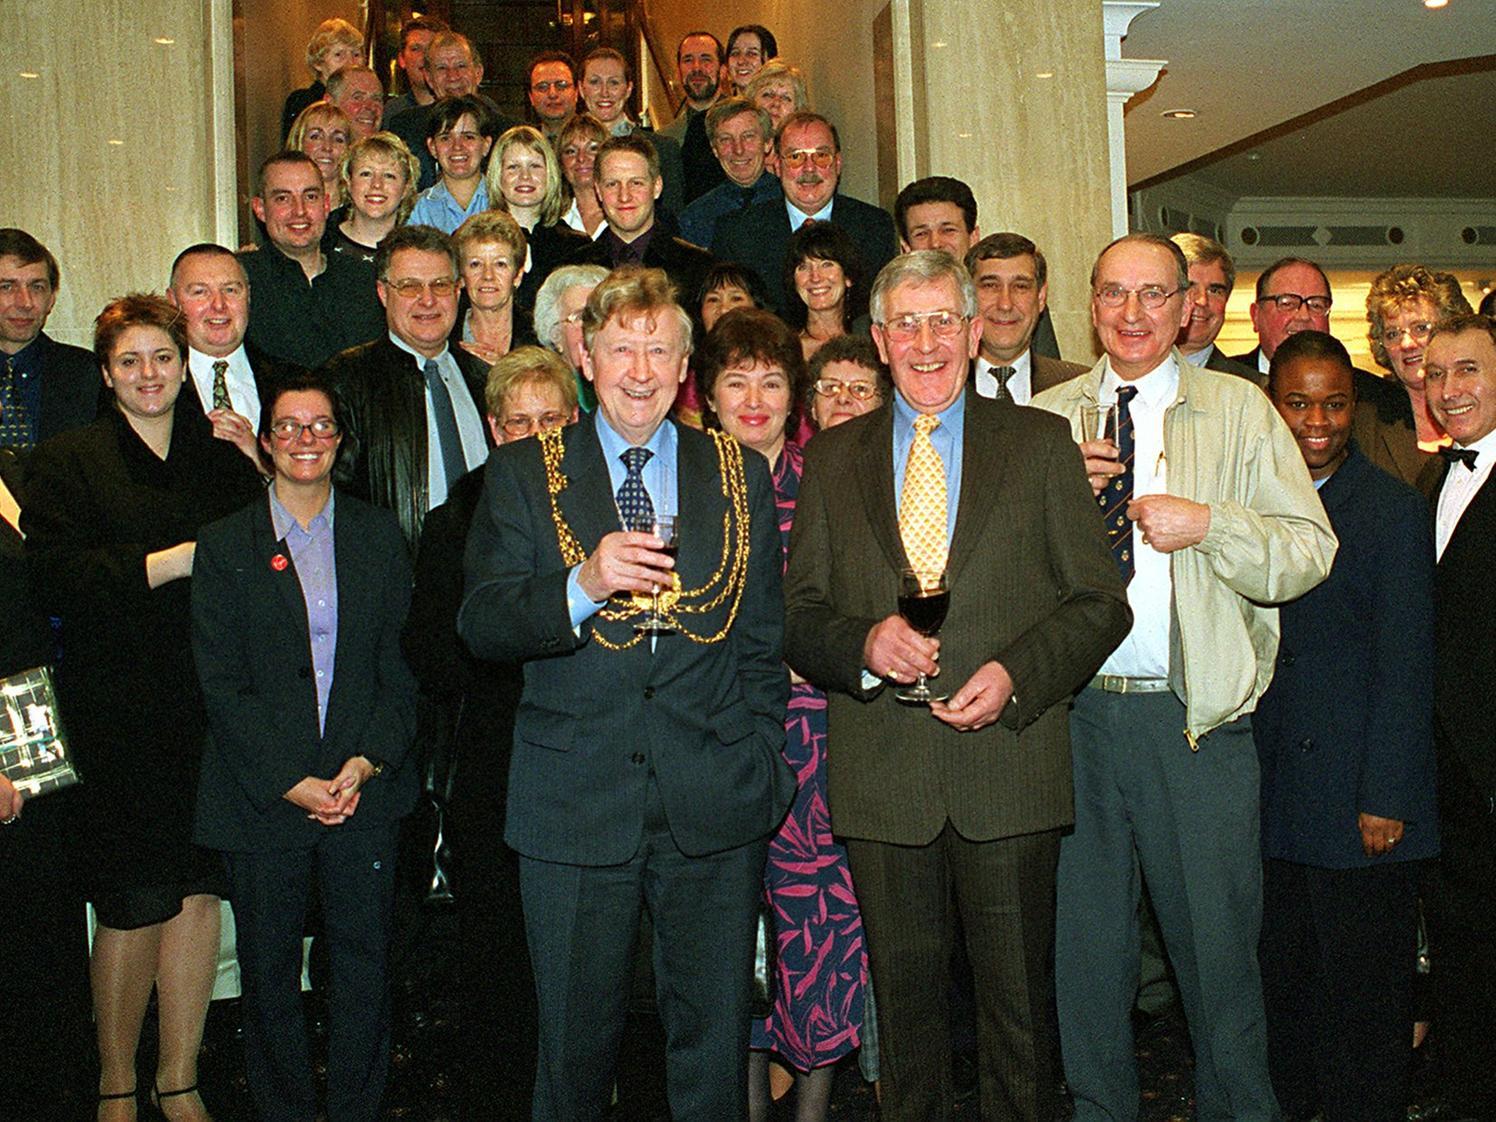 The Lord Mayor of Leeds, Councillor Bernard Atha, toasts Brian Clegg (centre) who was retiring from the Queens Hotel.